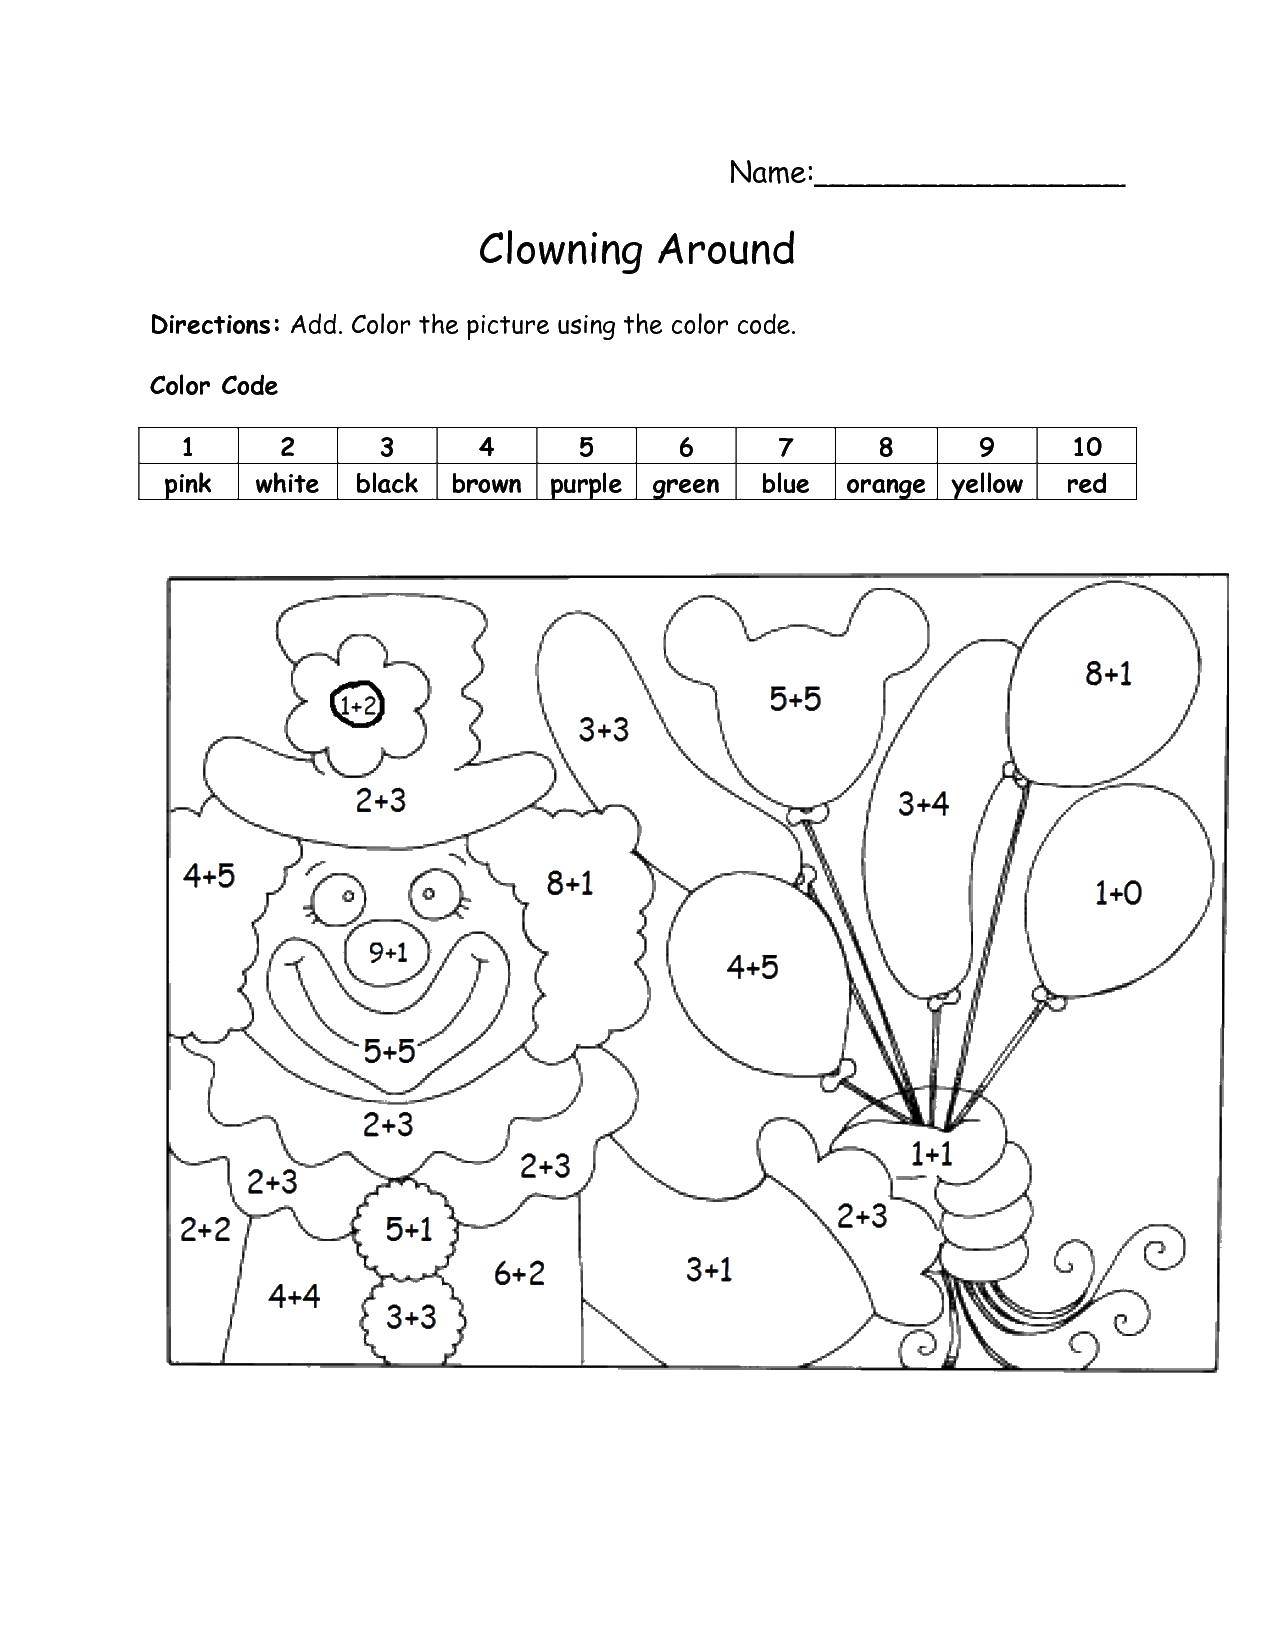 Coloring Color by numbers clown and figures. Category mathematical coloring pages. Tags:  Math, counting, logic.